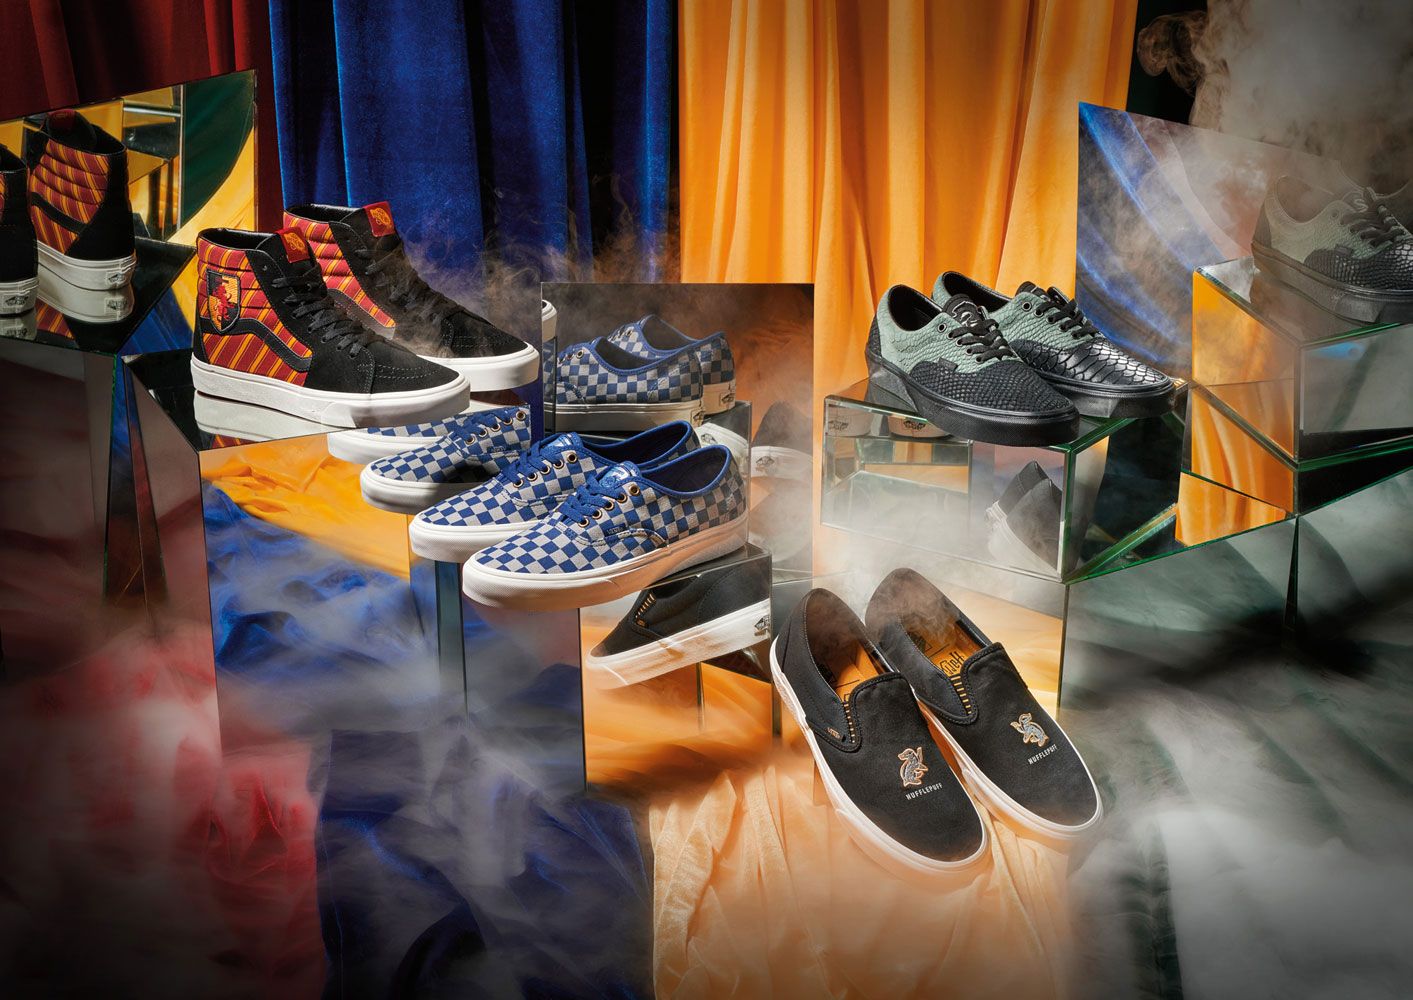 Harry Potter Vans shoes, apparel and accessories are coming